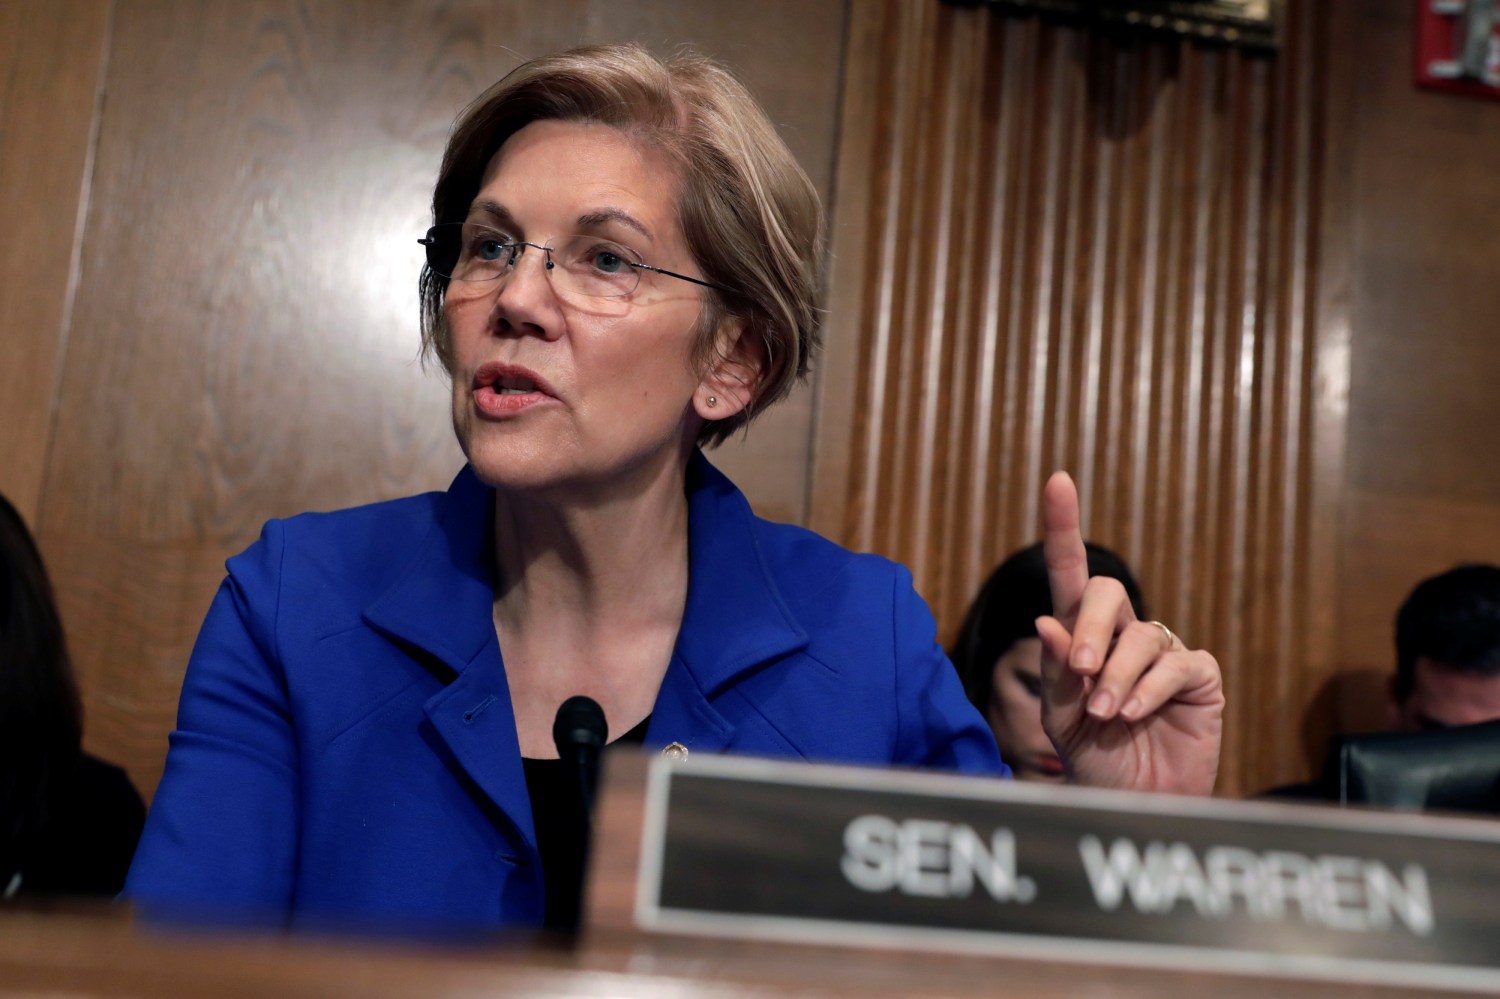 Senator Elizabeth Warren (D-MA) questions Alex Azar (not pictured) during a Senate Health, Education, Labor and Pensions Committee hearing on his nomination to be Health and Human Services secretary on Capitol Hill in Washington, U.S., November 29, 2017. REUTERS/Yuri Gripas - RC16615E8900